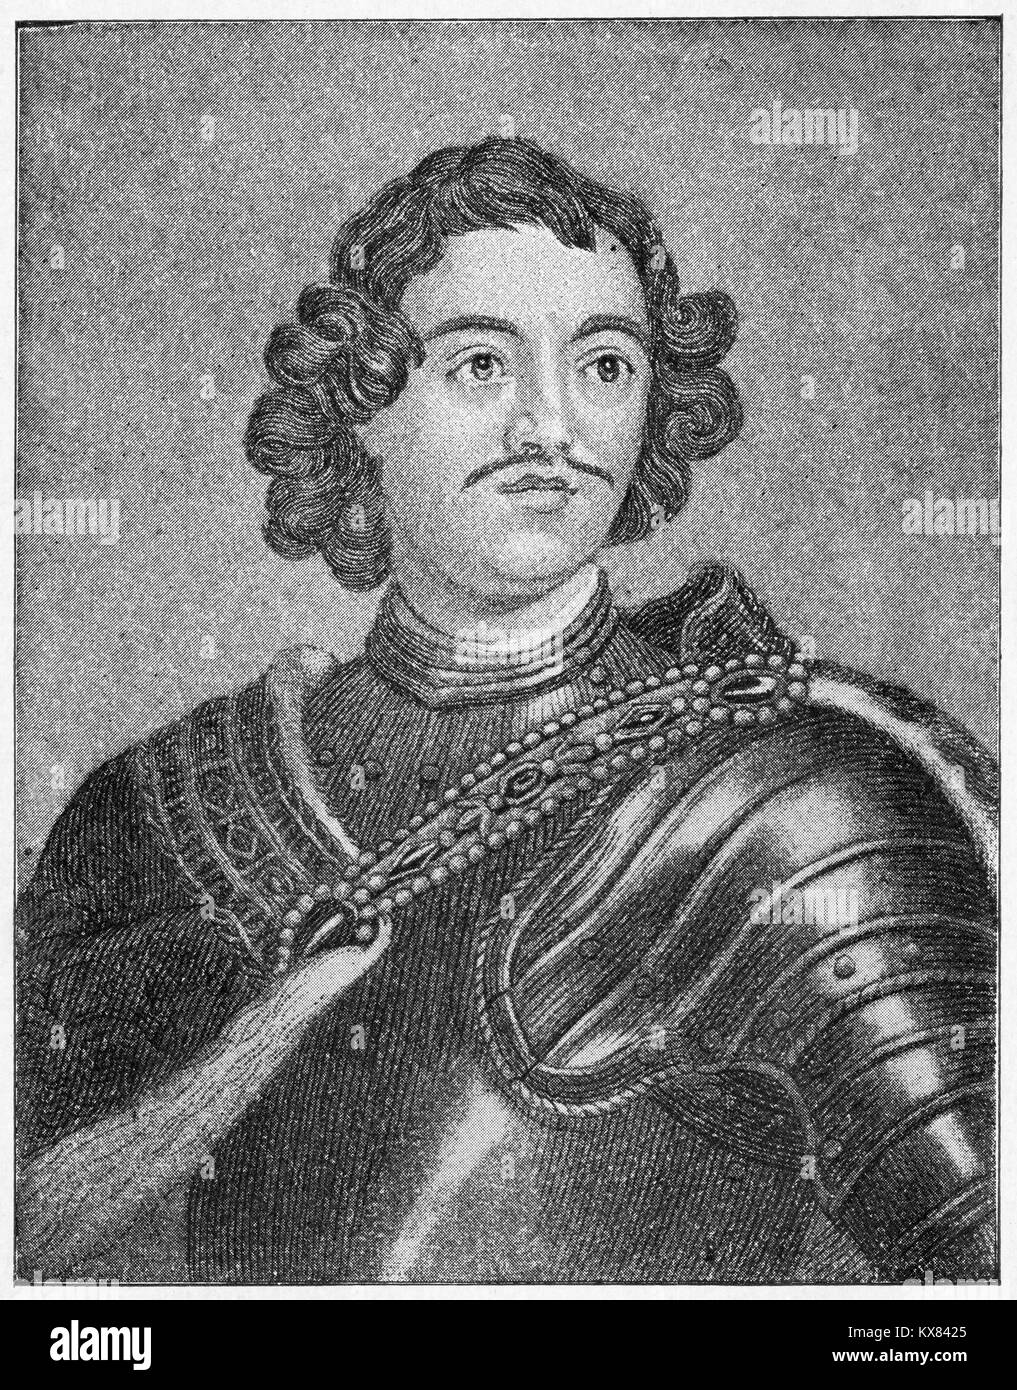 Engraving of Peter the Great (1672 - 1725), Emperor of Russia from 1682 - 1725. From Peter the Great by Jacob Abbott, 1887. Stock Photo